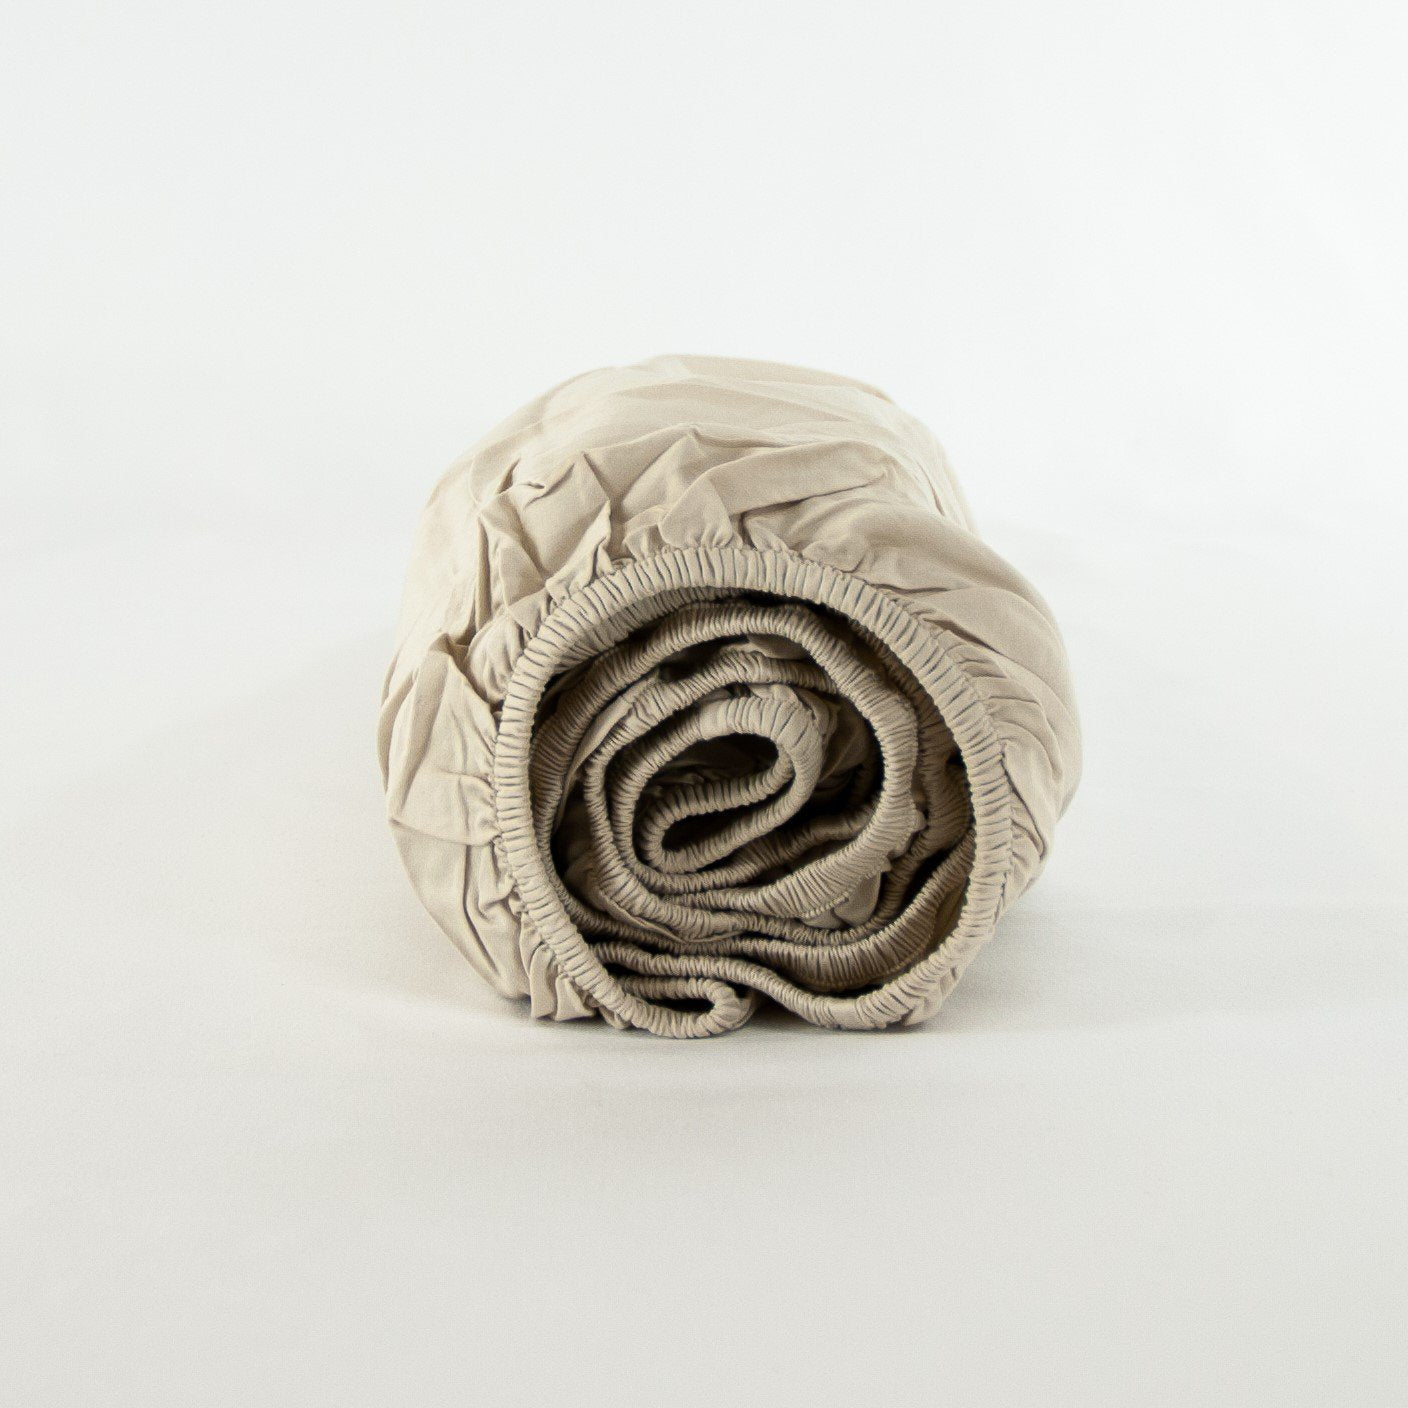 Rolled up organic cotton fitted sheet in egg shell white